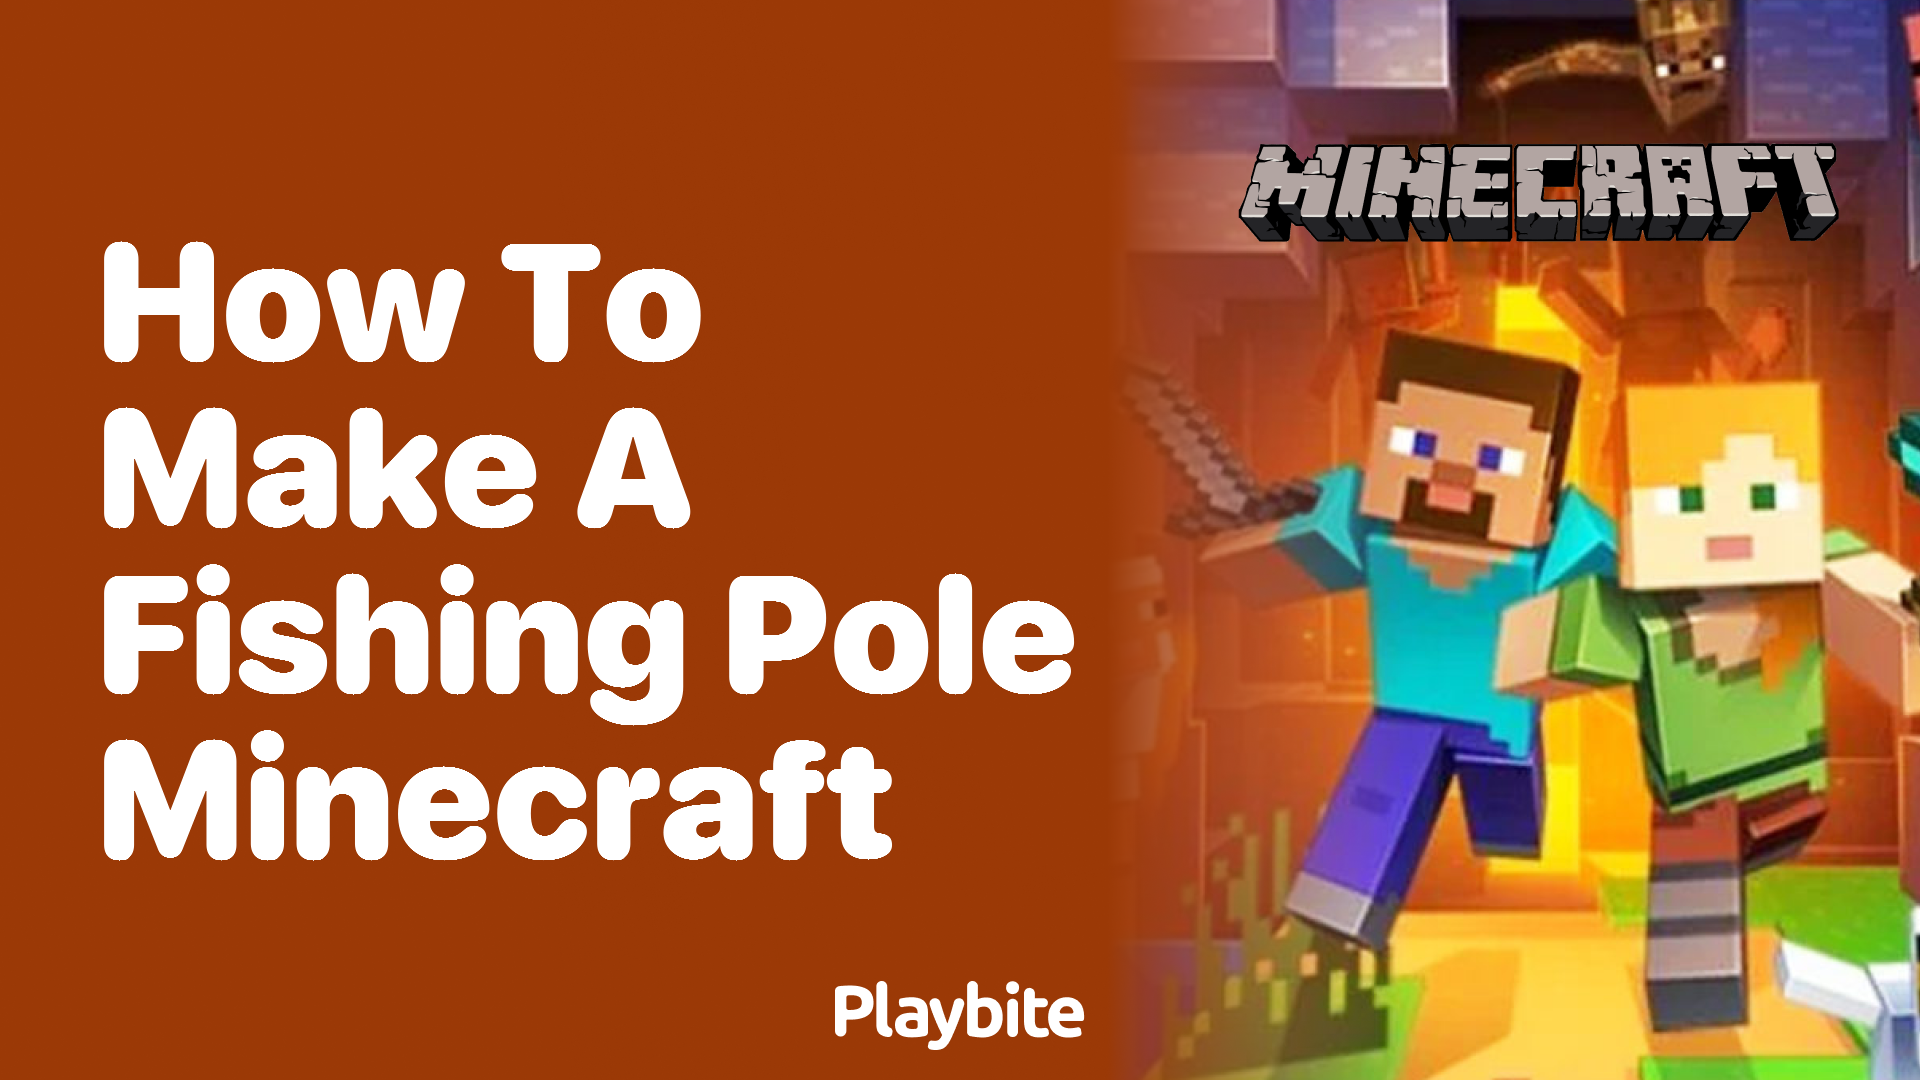 How to Make a Fishing Pole in Minecraft - Playbite